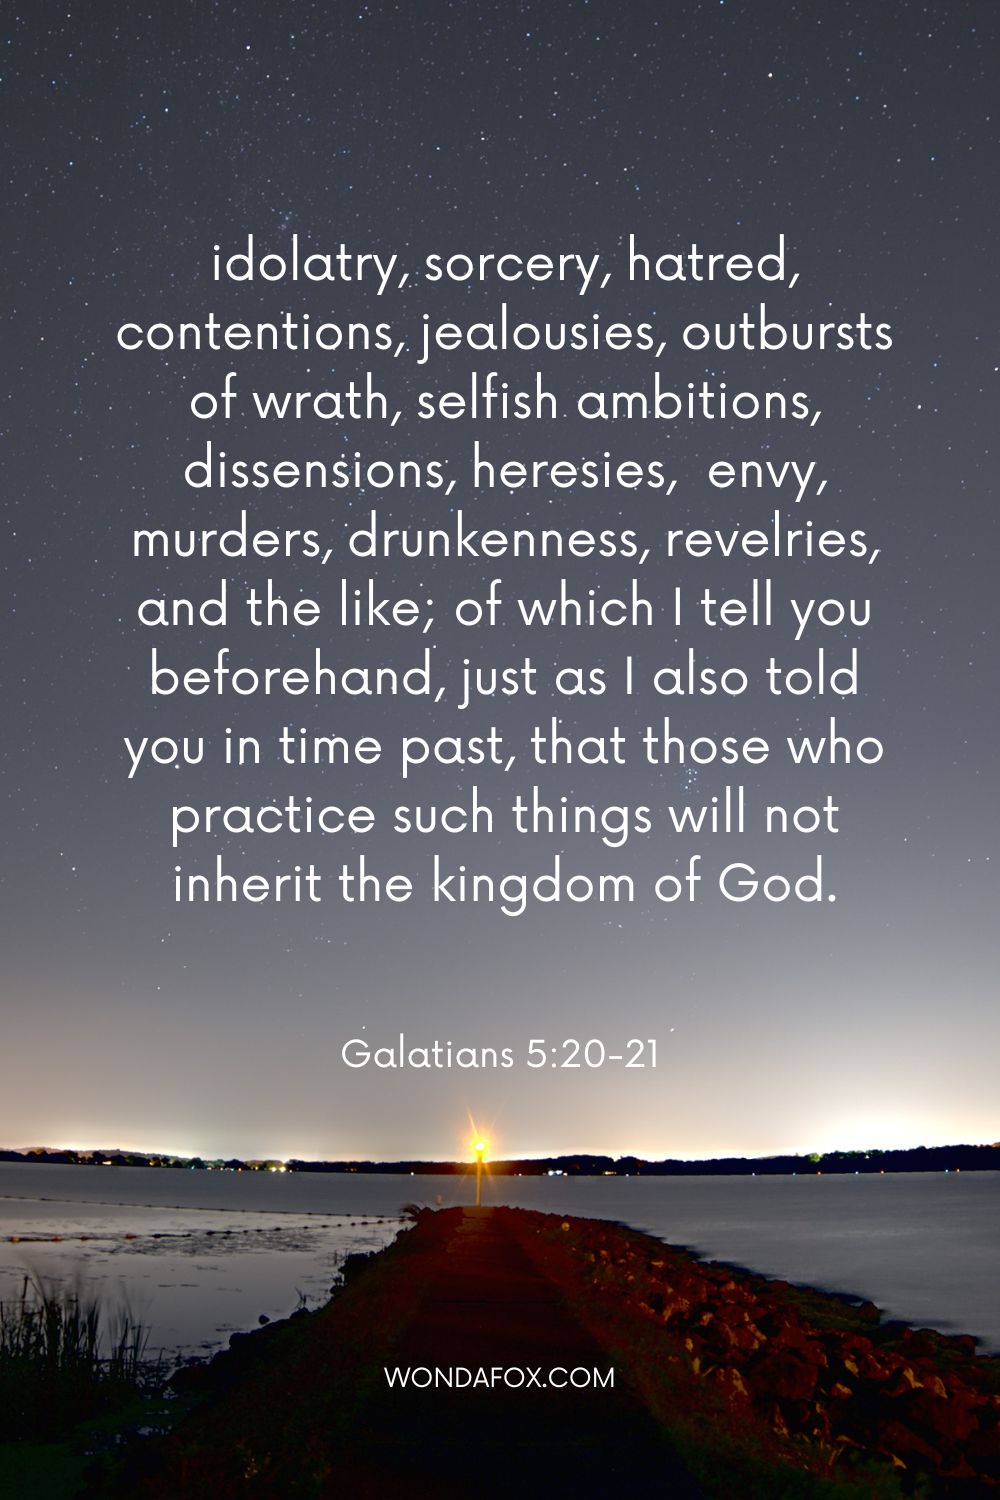 idolatry, sorcery, hatred, contentions, jealousies, outbursts of wrath, selfish ambitions, dissensions, heresies,  envy, murders, drunkenness, revelries, and the like; of which I tell you beforehand, just as I also told you in time past, that those who practice such things will not inherit the kingdom of God.